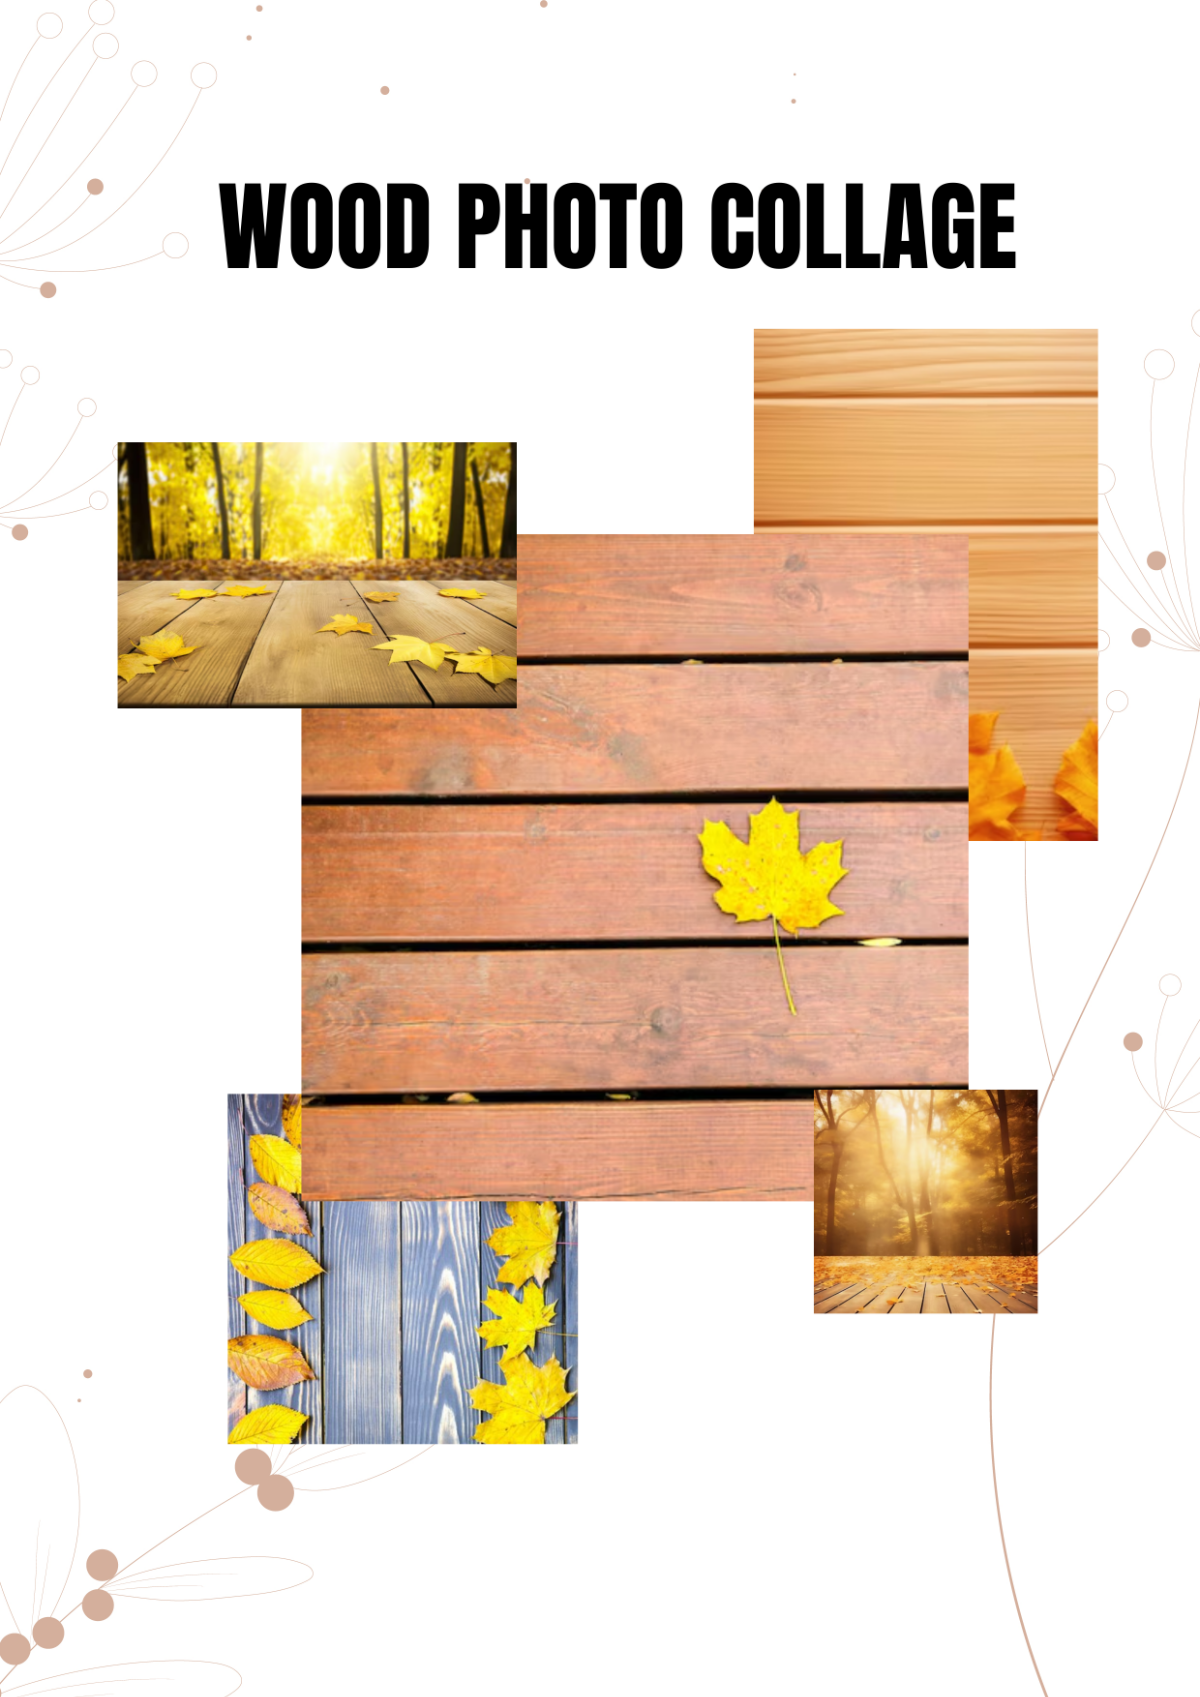 Wooden Photo Collage